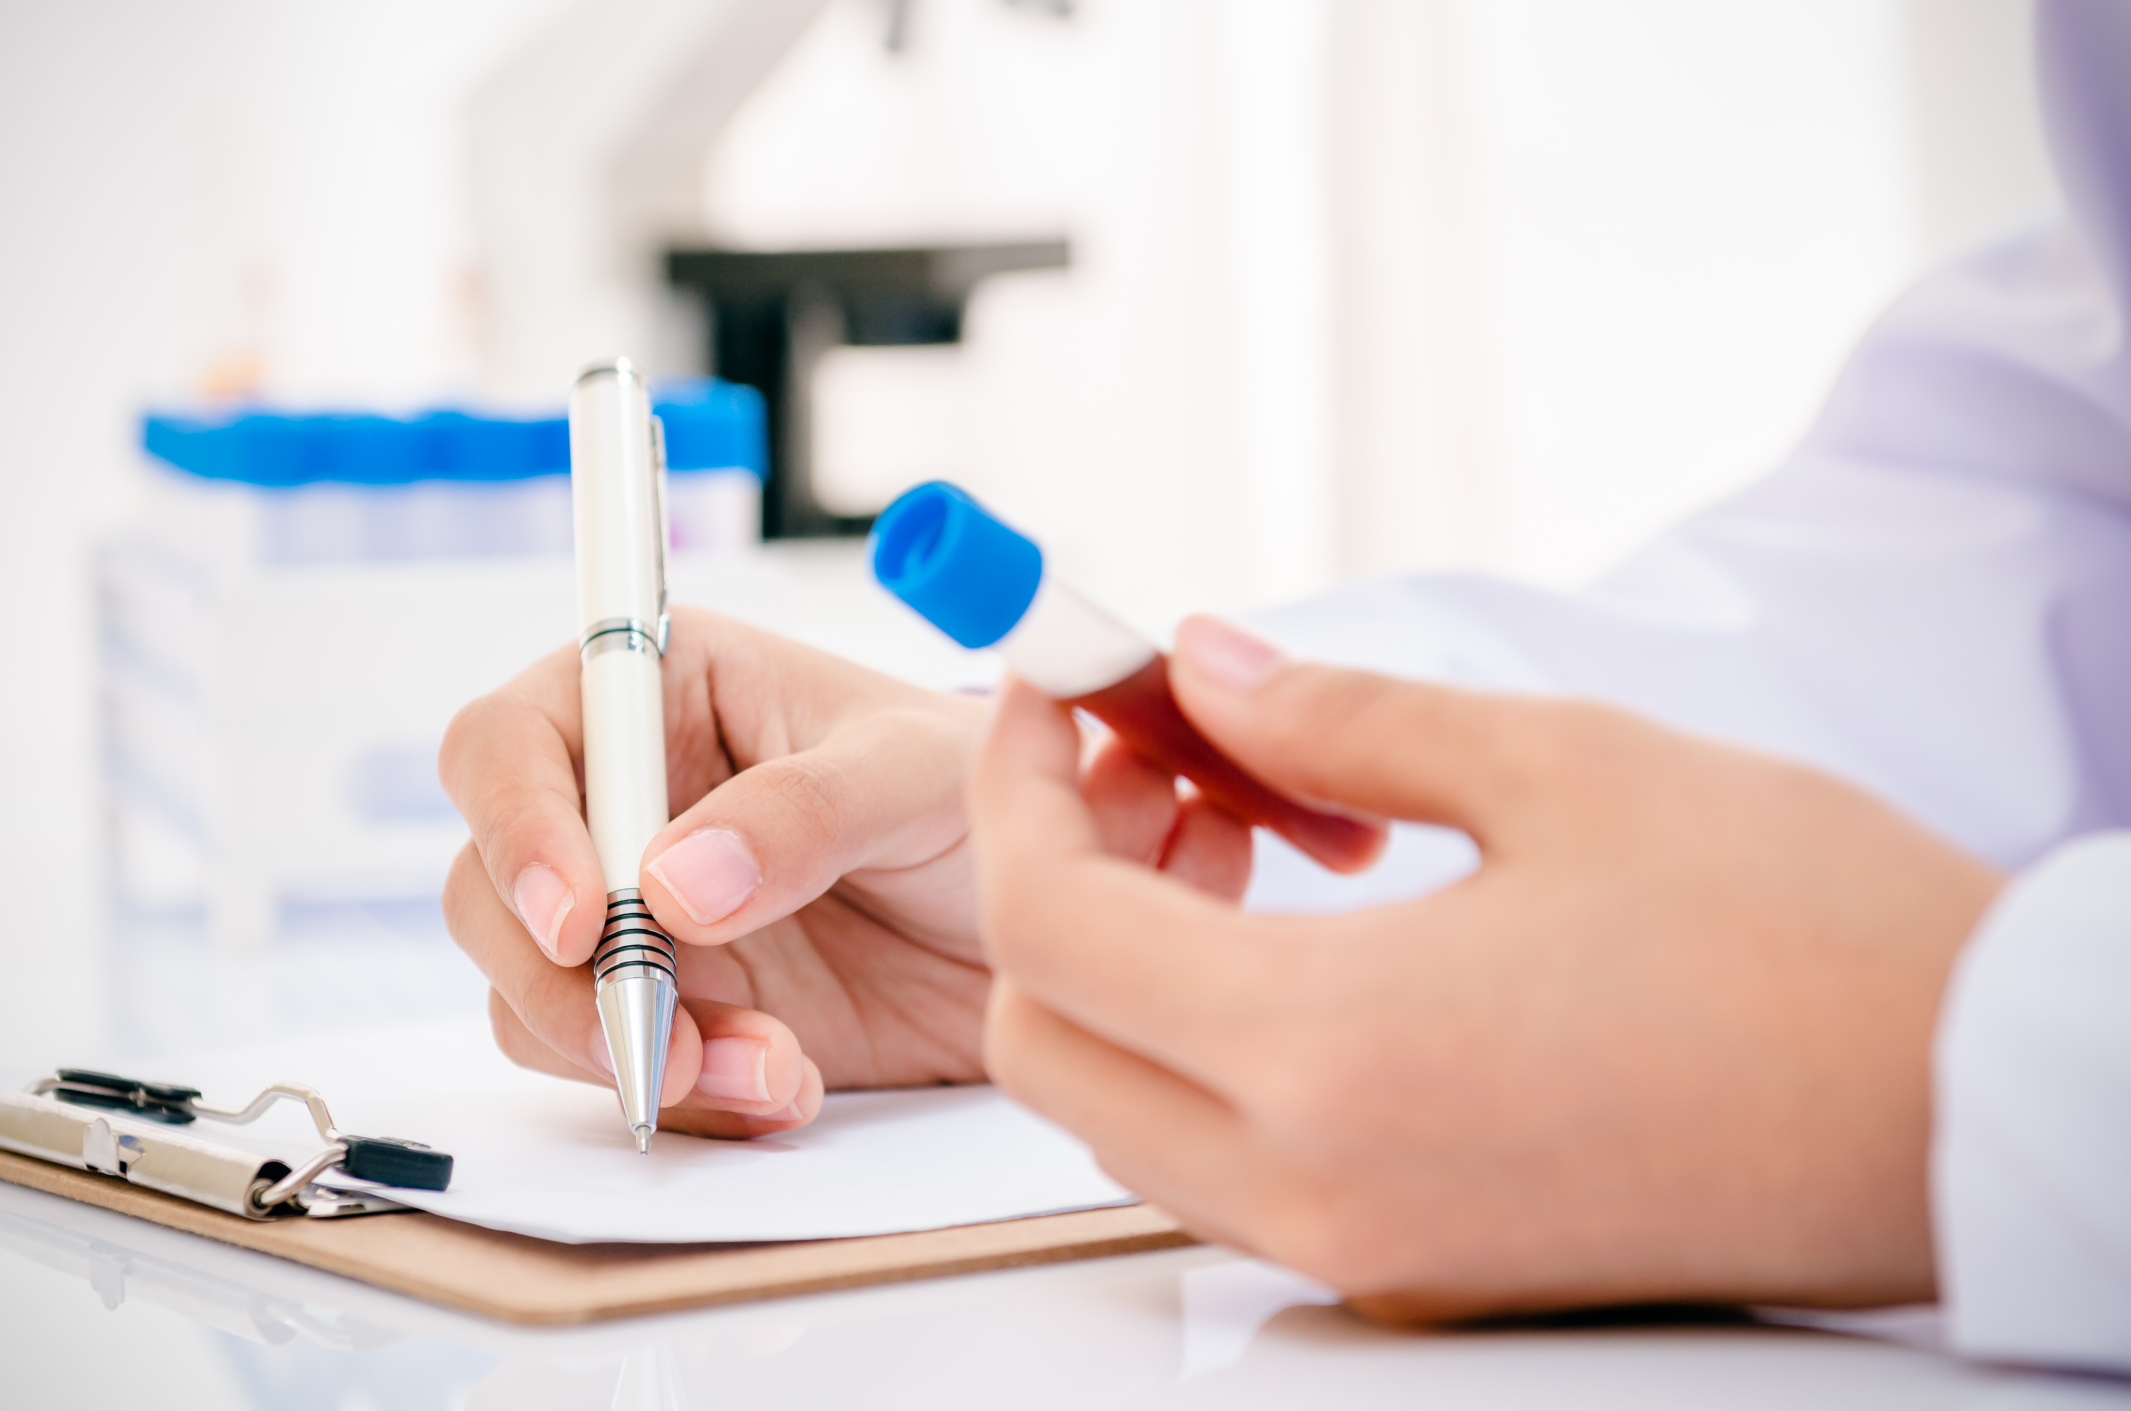 Blood test helps physicians diagnose patients’ risk for coronary artery disease